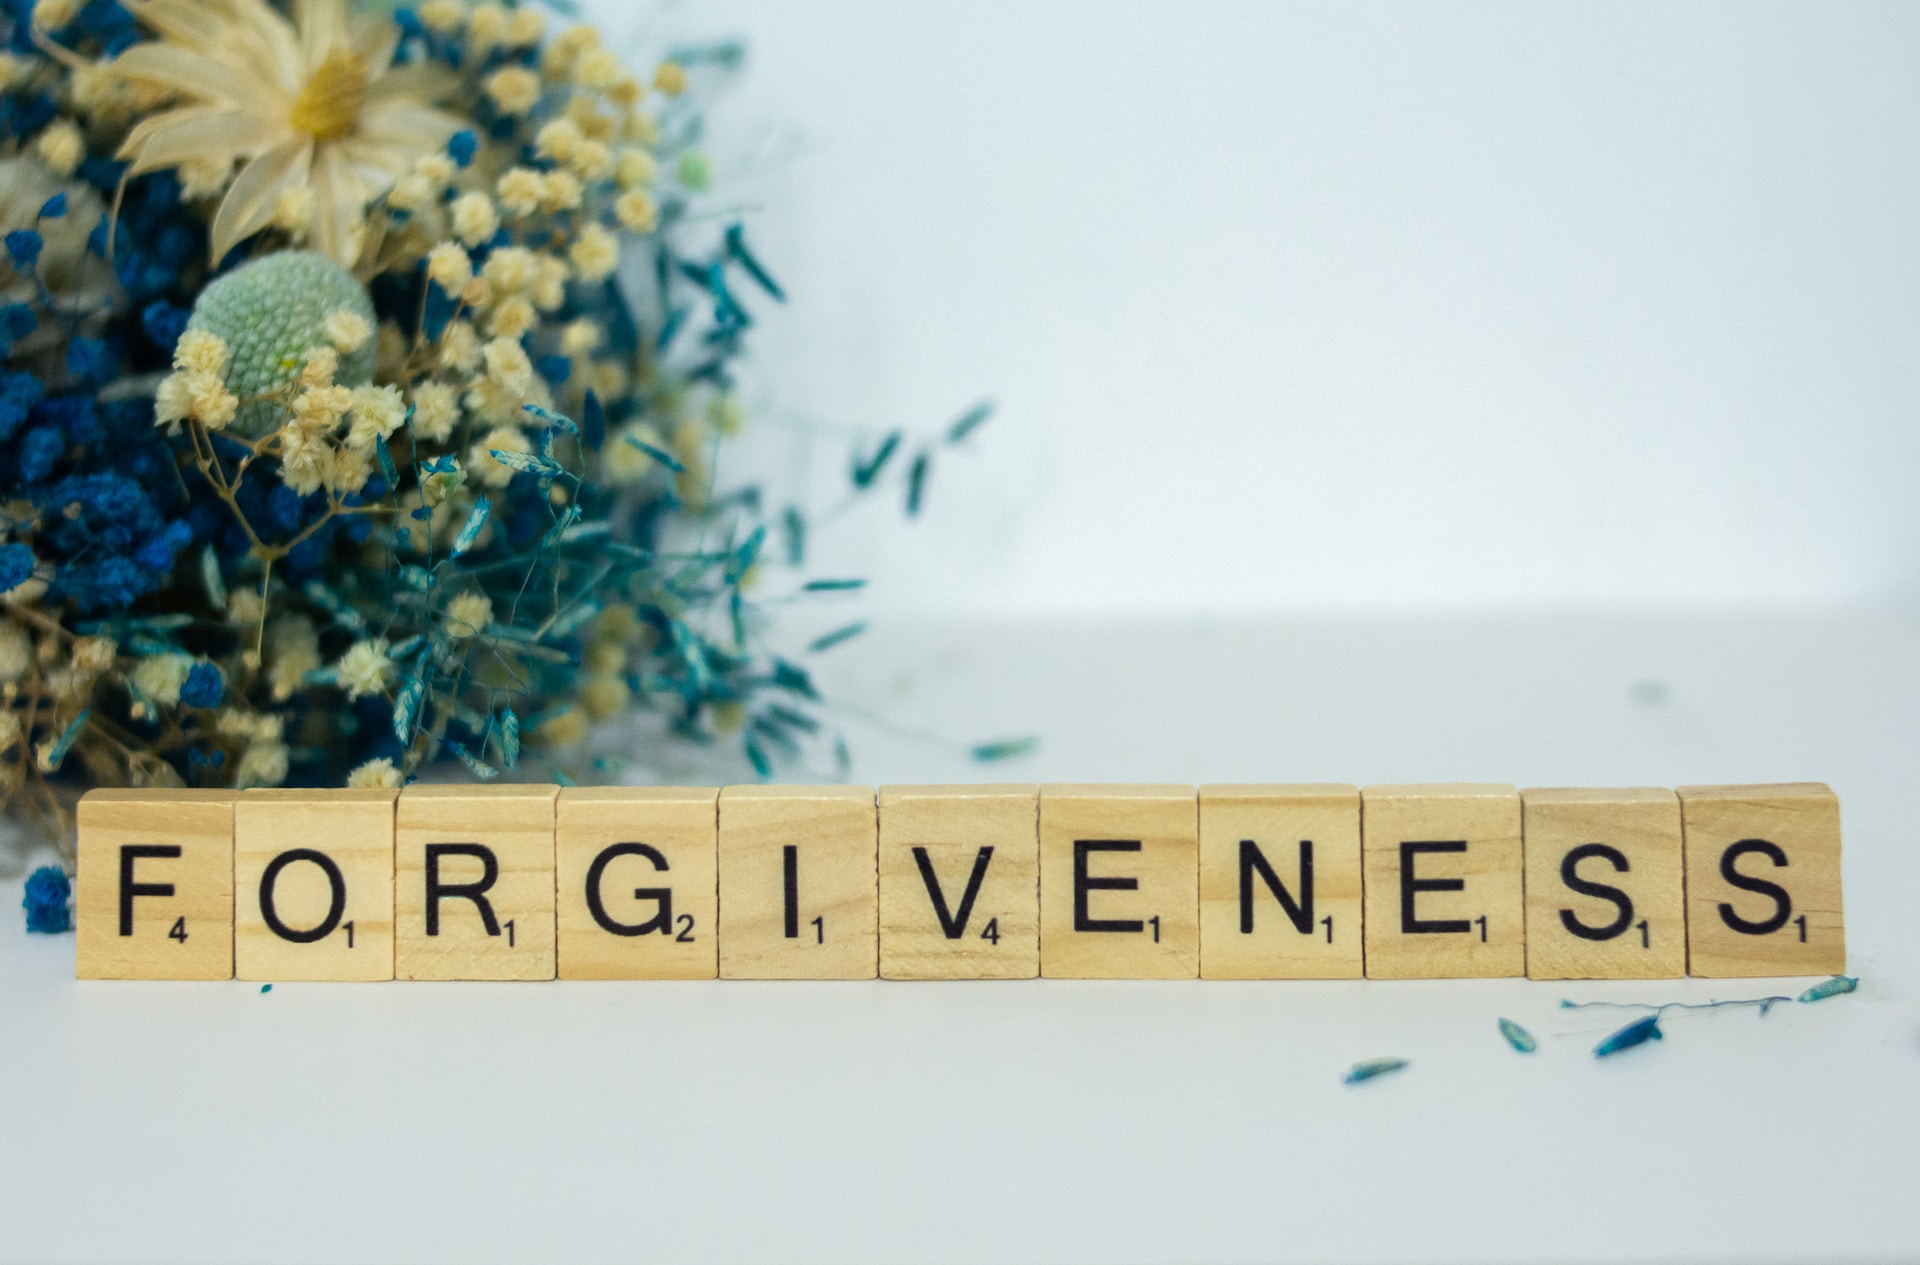 Forgiveness in marriage